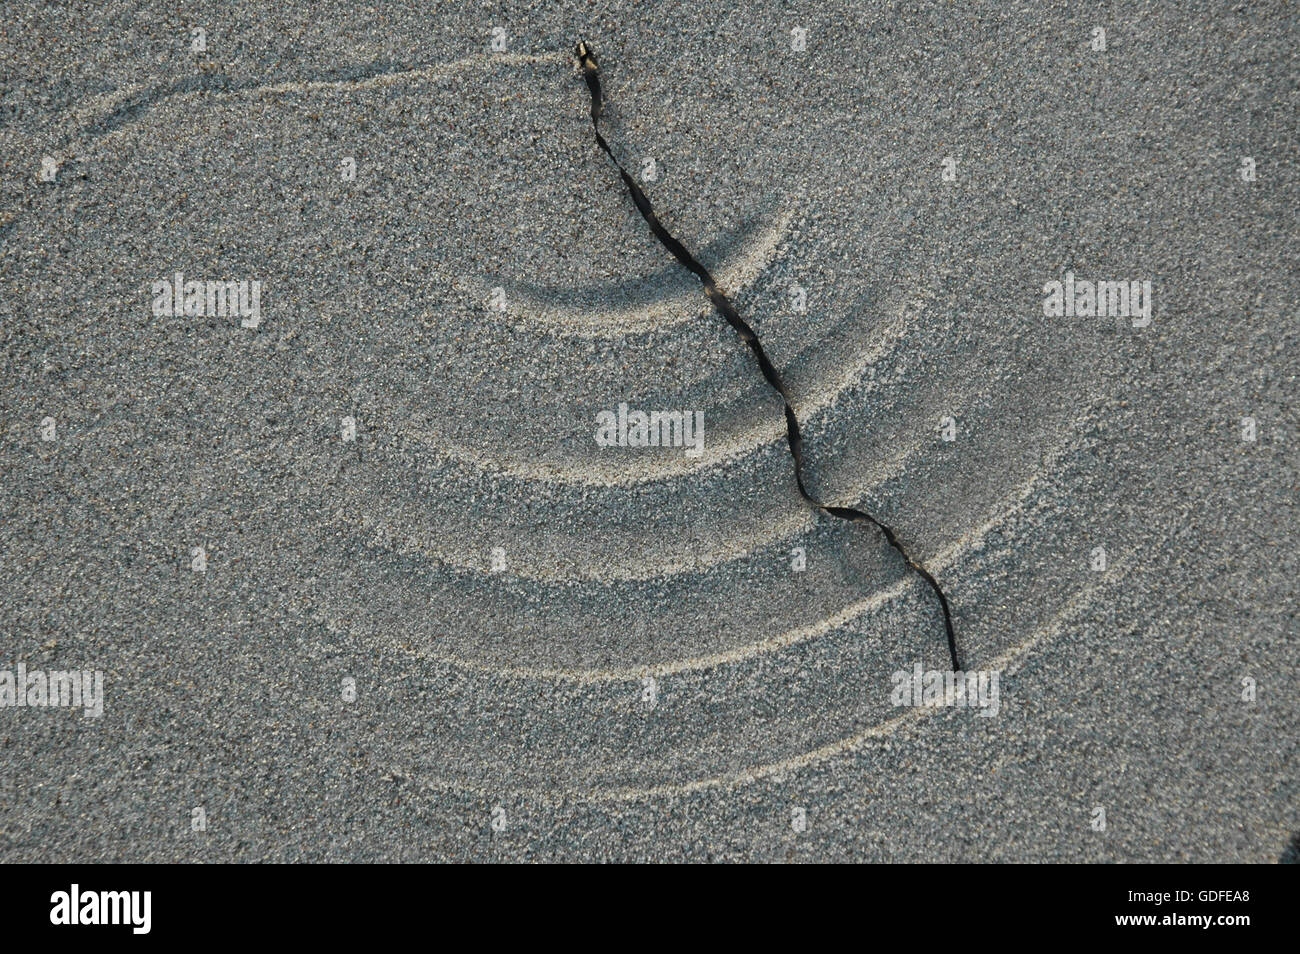 A string of eelgrass has drawn a pattern in the sand as the wind has moved it forth and back like a viper. Stock Photo